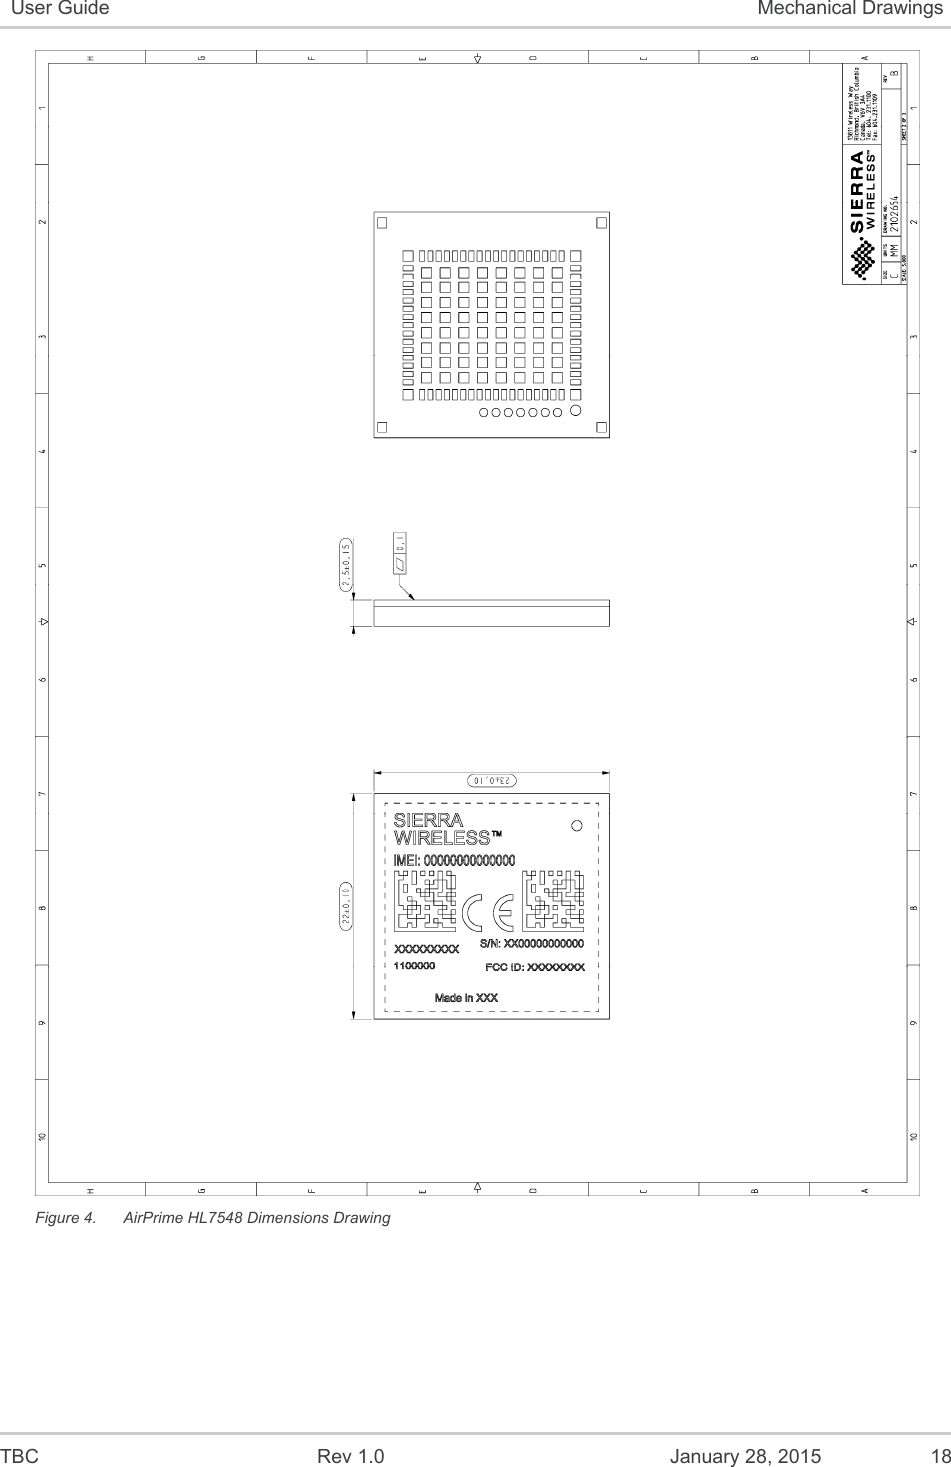  TBC  Rev 1.0  January 28, 2015  18 User Guide  Mechanical Drawings  Figure 4.  AirPrime HL7548 Dimensions Drawing 